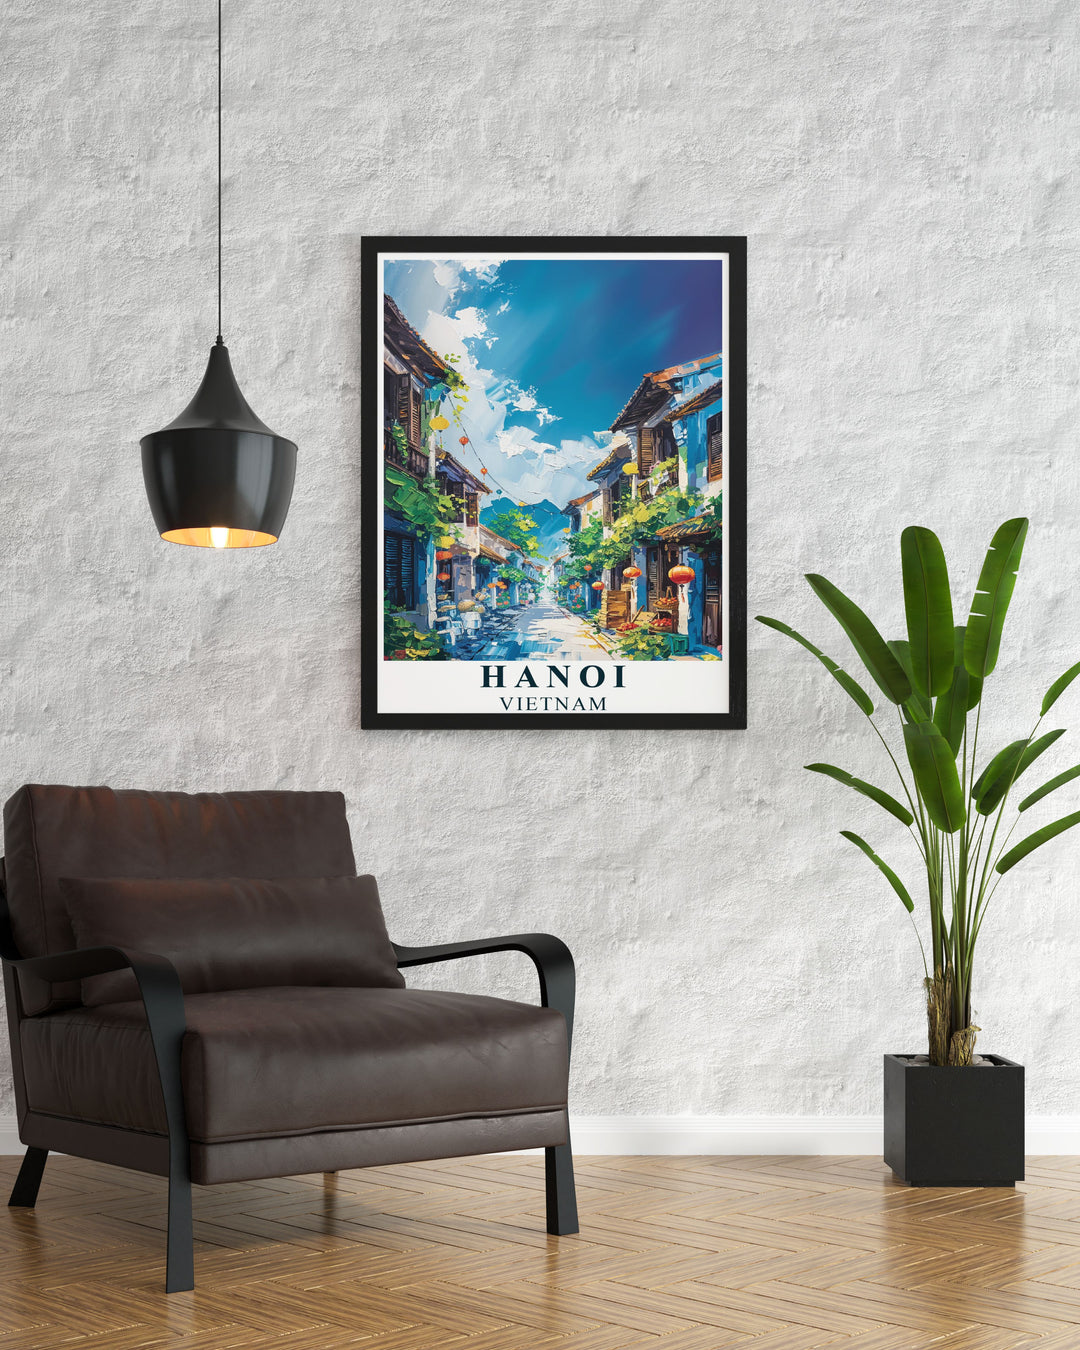 This art print of Hanois Old Quarter captures the vibrant energy and historical significance of one of Vietnams most famous landmarks.